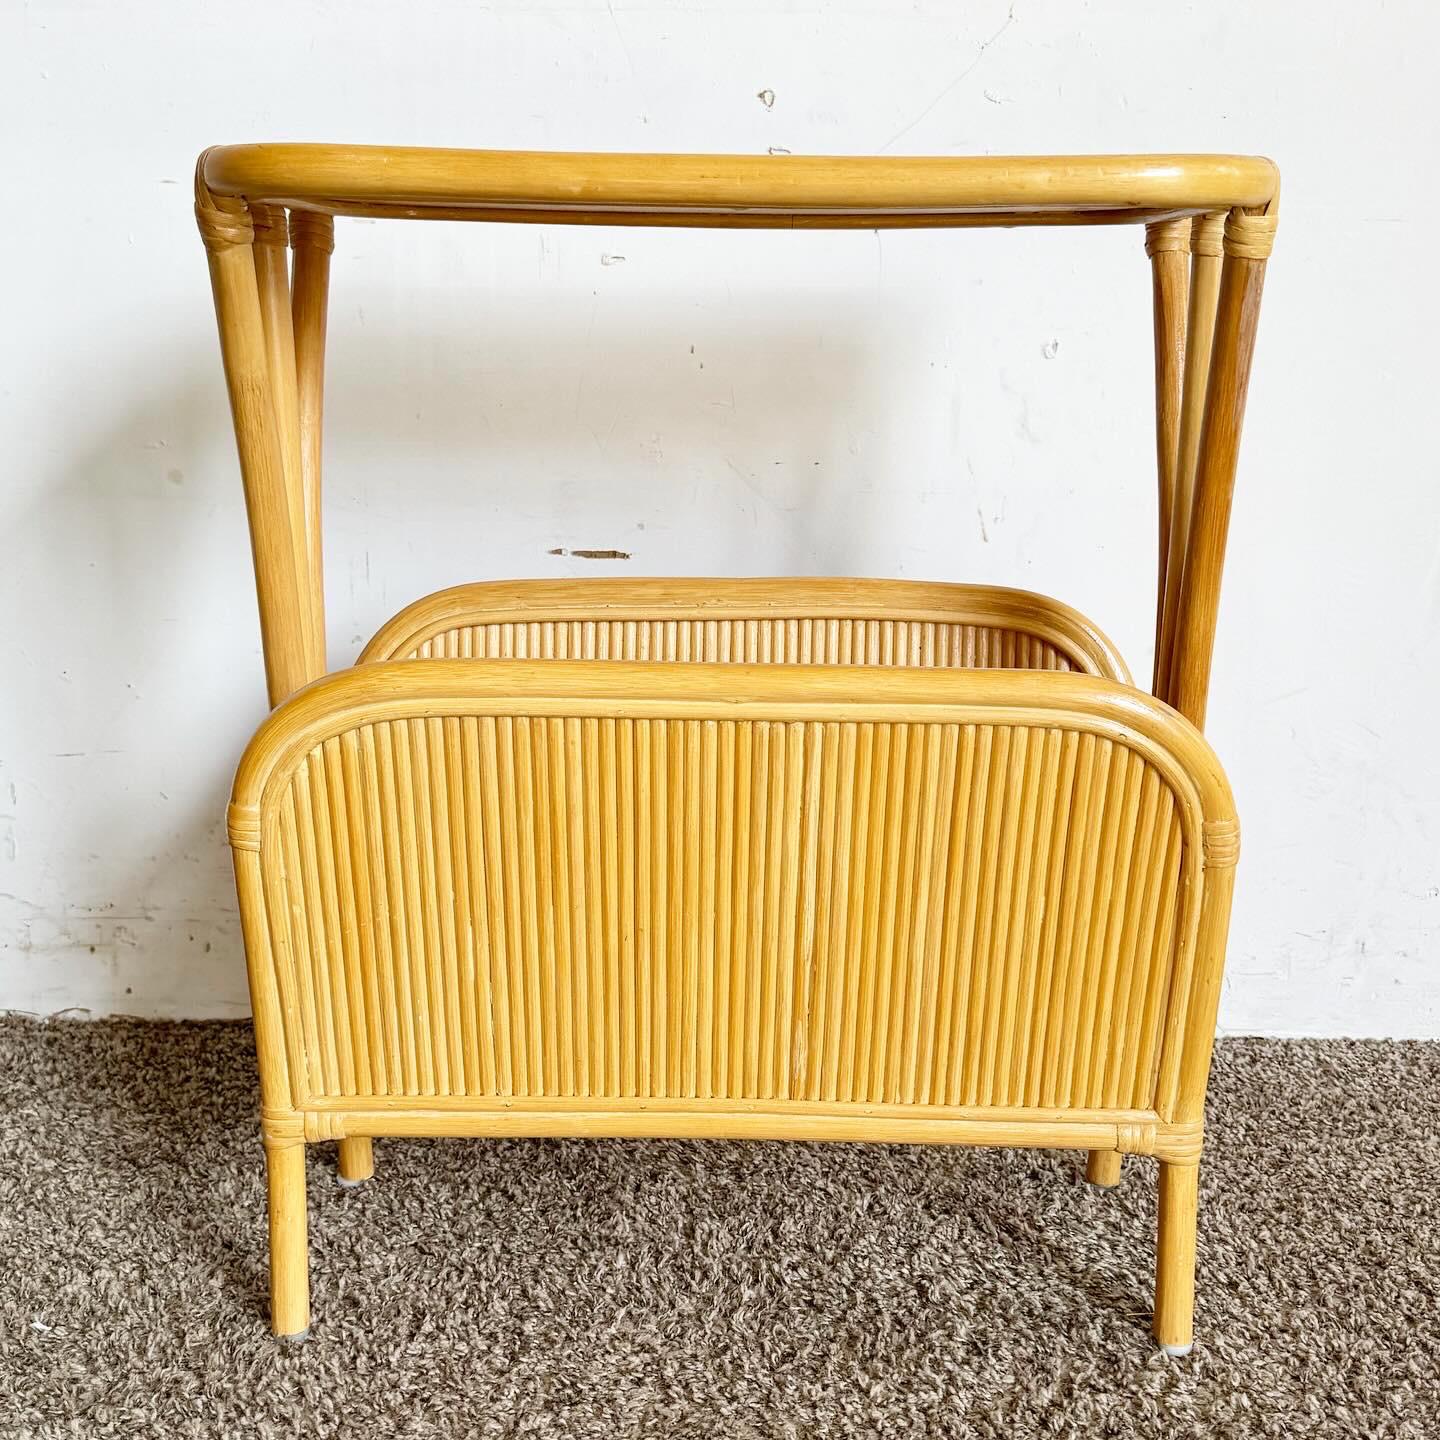 Boho Chic Bamboo Rattan Pencil Reed Swirl Side Table/Magazine Rack In Good Condition For Sale In Delray Beach, FL